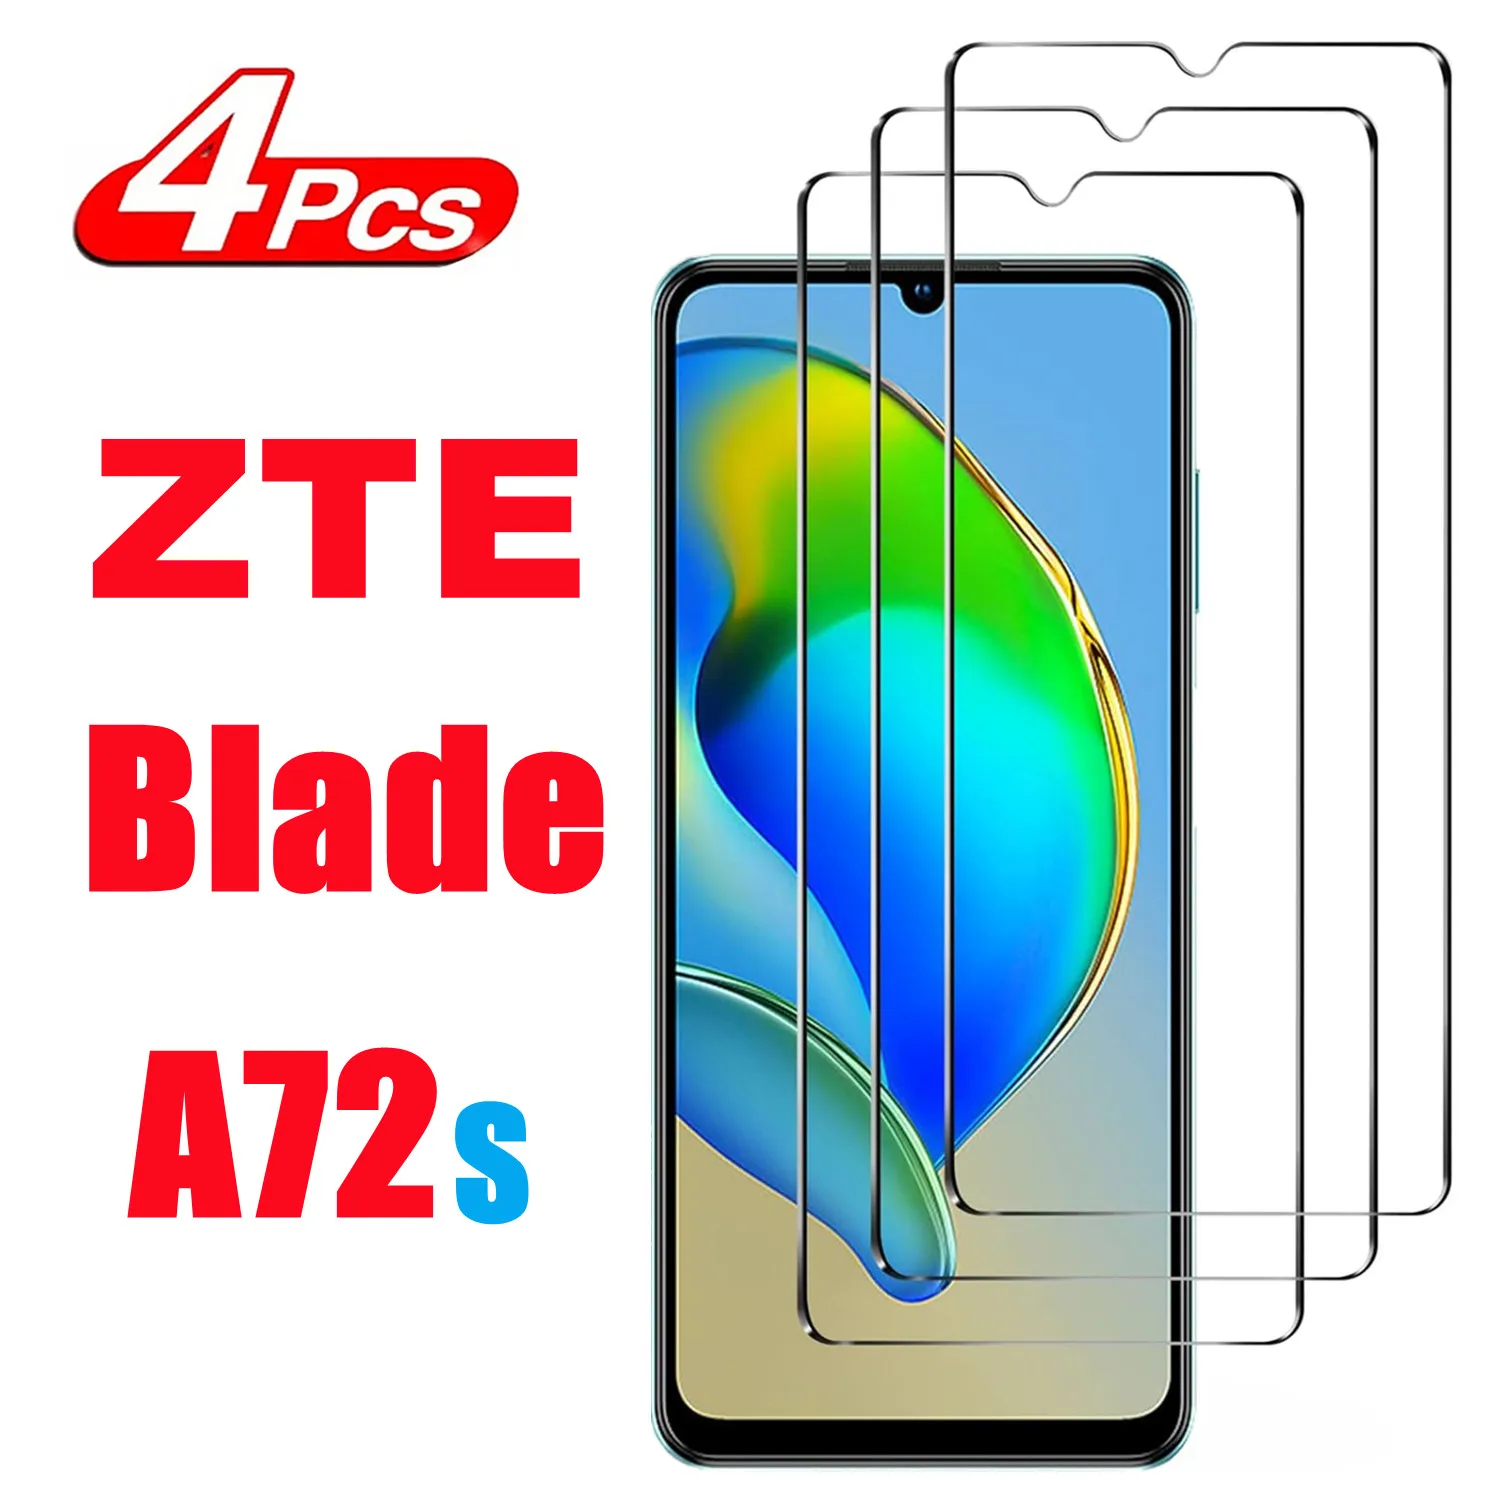 2/4 Pcs For ZTE Blade A72s 9H Tempered Glass For ZTE Blade A72s Screen Protector Glass Film